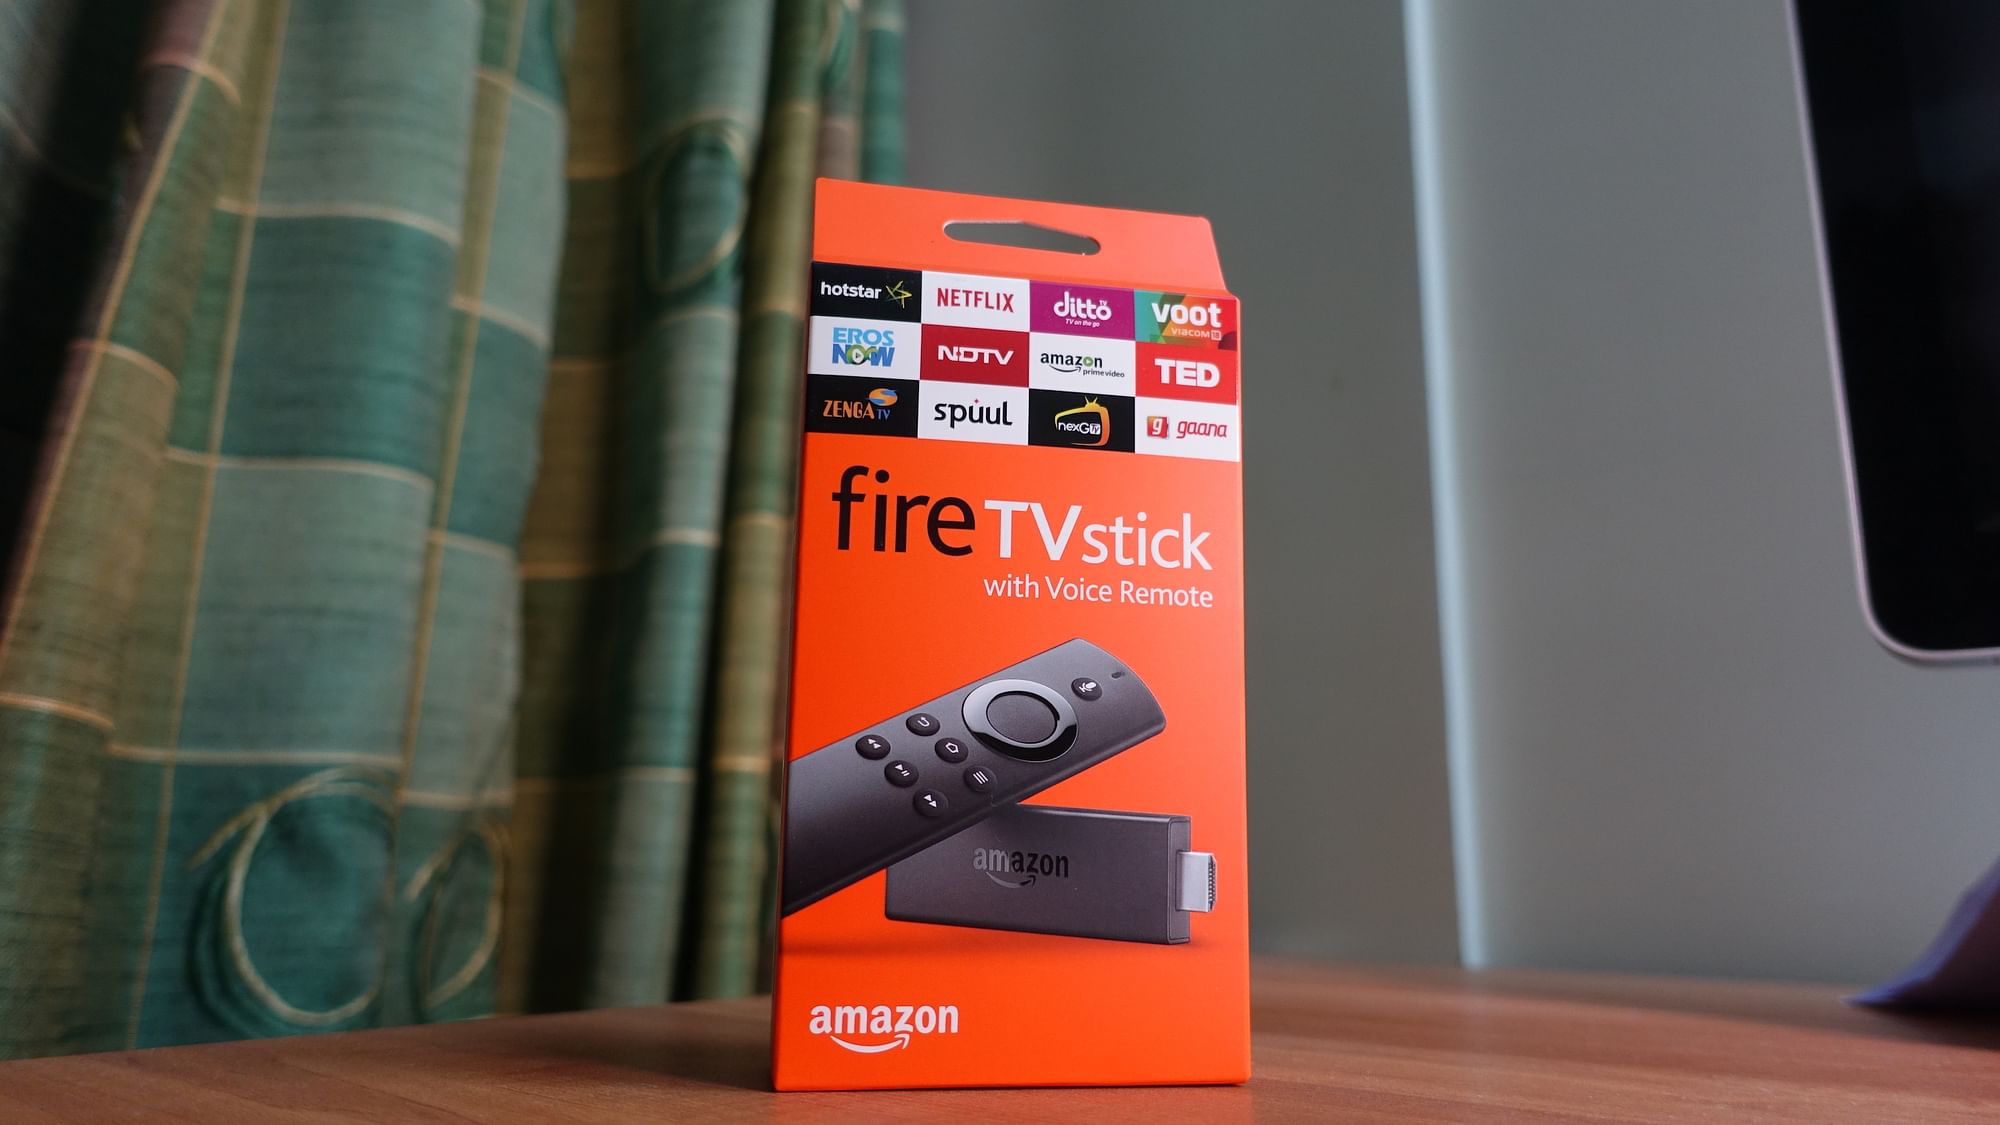 Amazon Fire TV stick is finally available in India. (Photo: <b>The Quint</b>/<a href="https://twitter.com/2shar">@shar</a>)